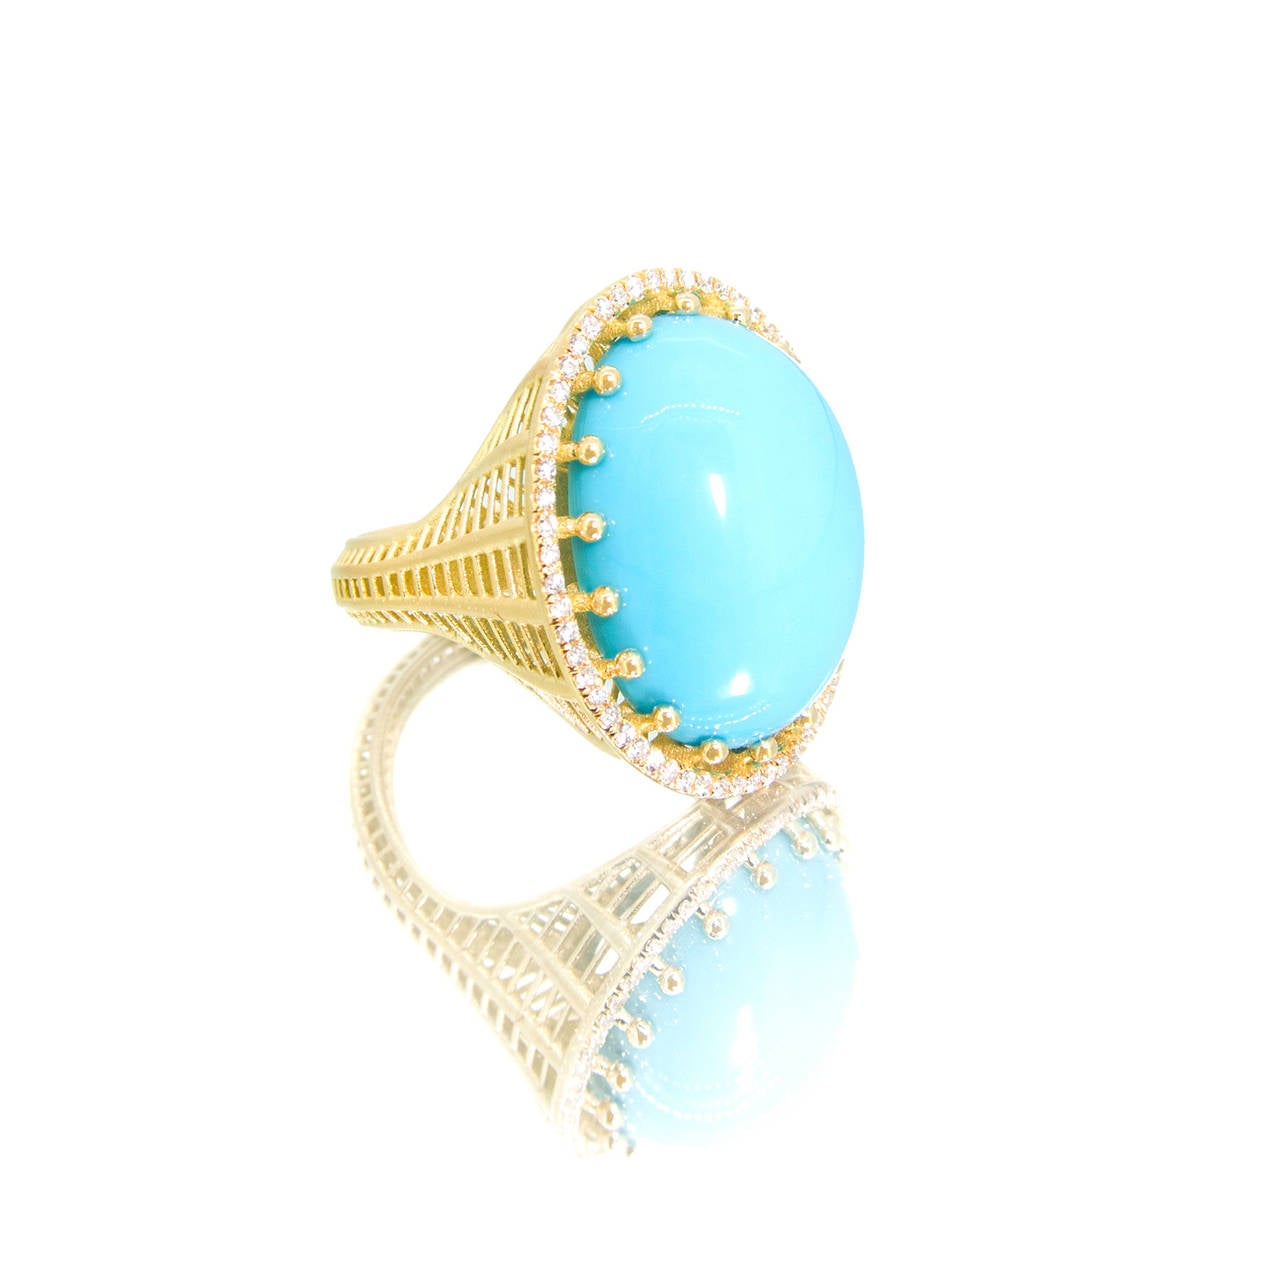 From the Wired Collection, a cocktail ring in 18k yellow gold with a ball-prong-set 14 ct Sleeping Beauty turquoise cabochon and white diamond pavé (0.23 ct). Cabochon is 15 x 20mm (or roughly 5/8 x 3/4